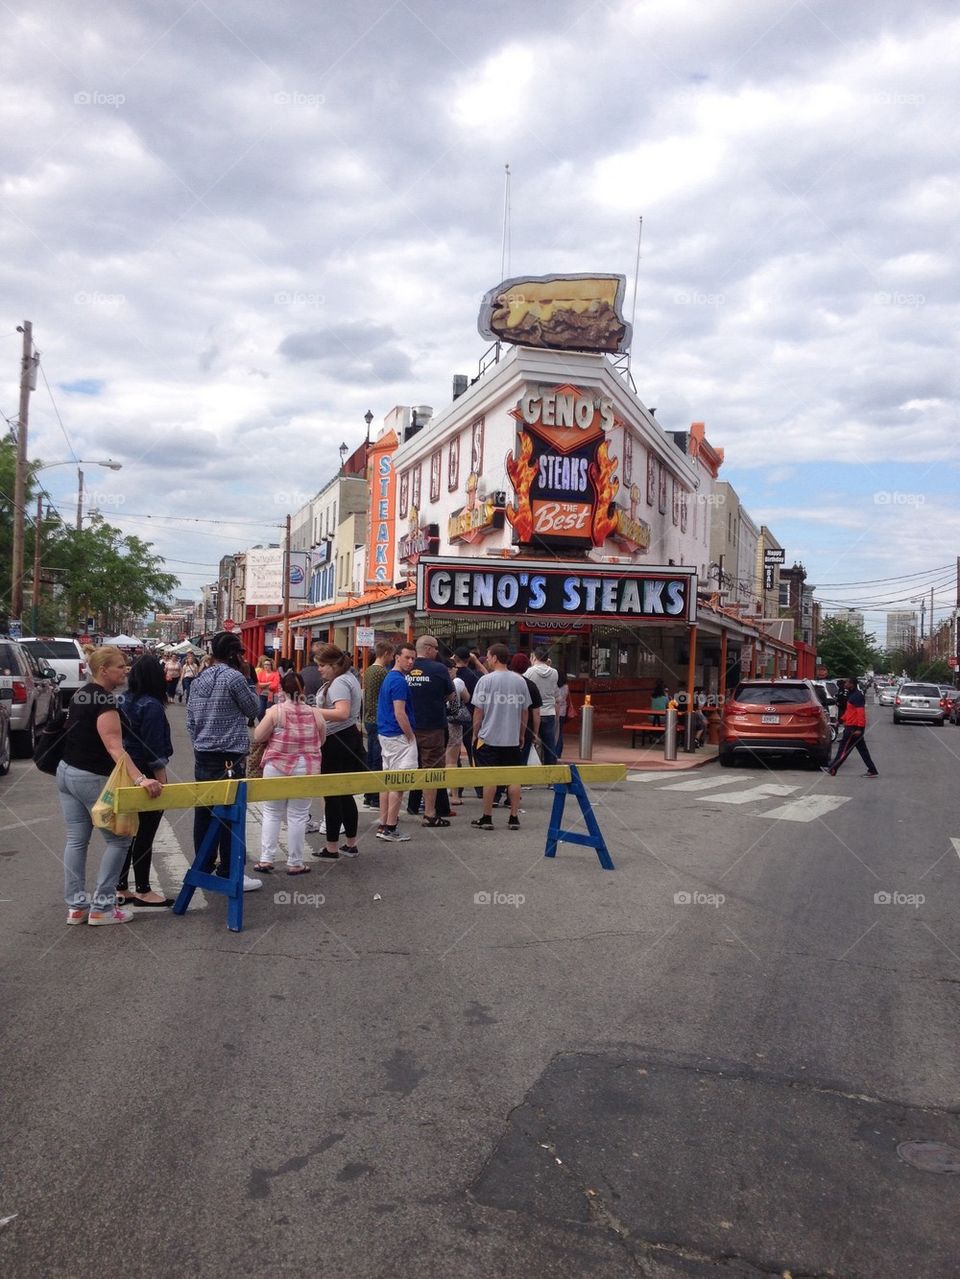 The Famous Geno's